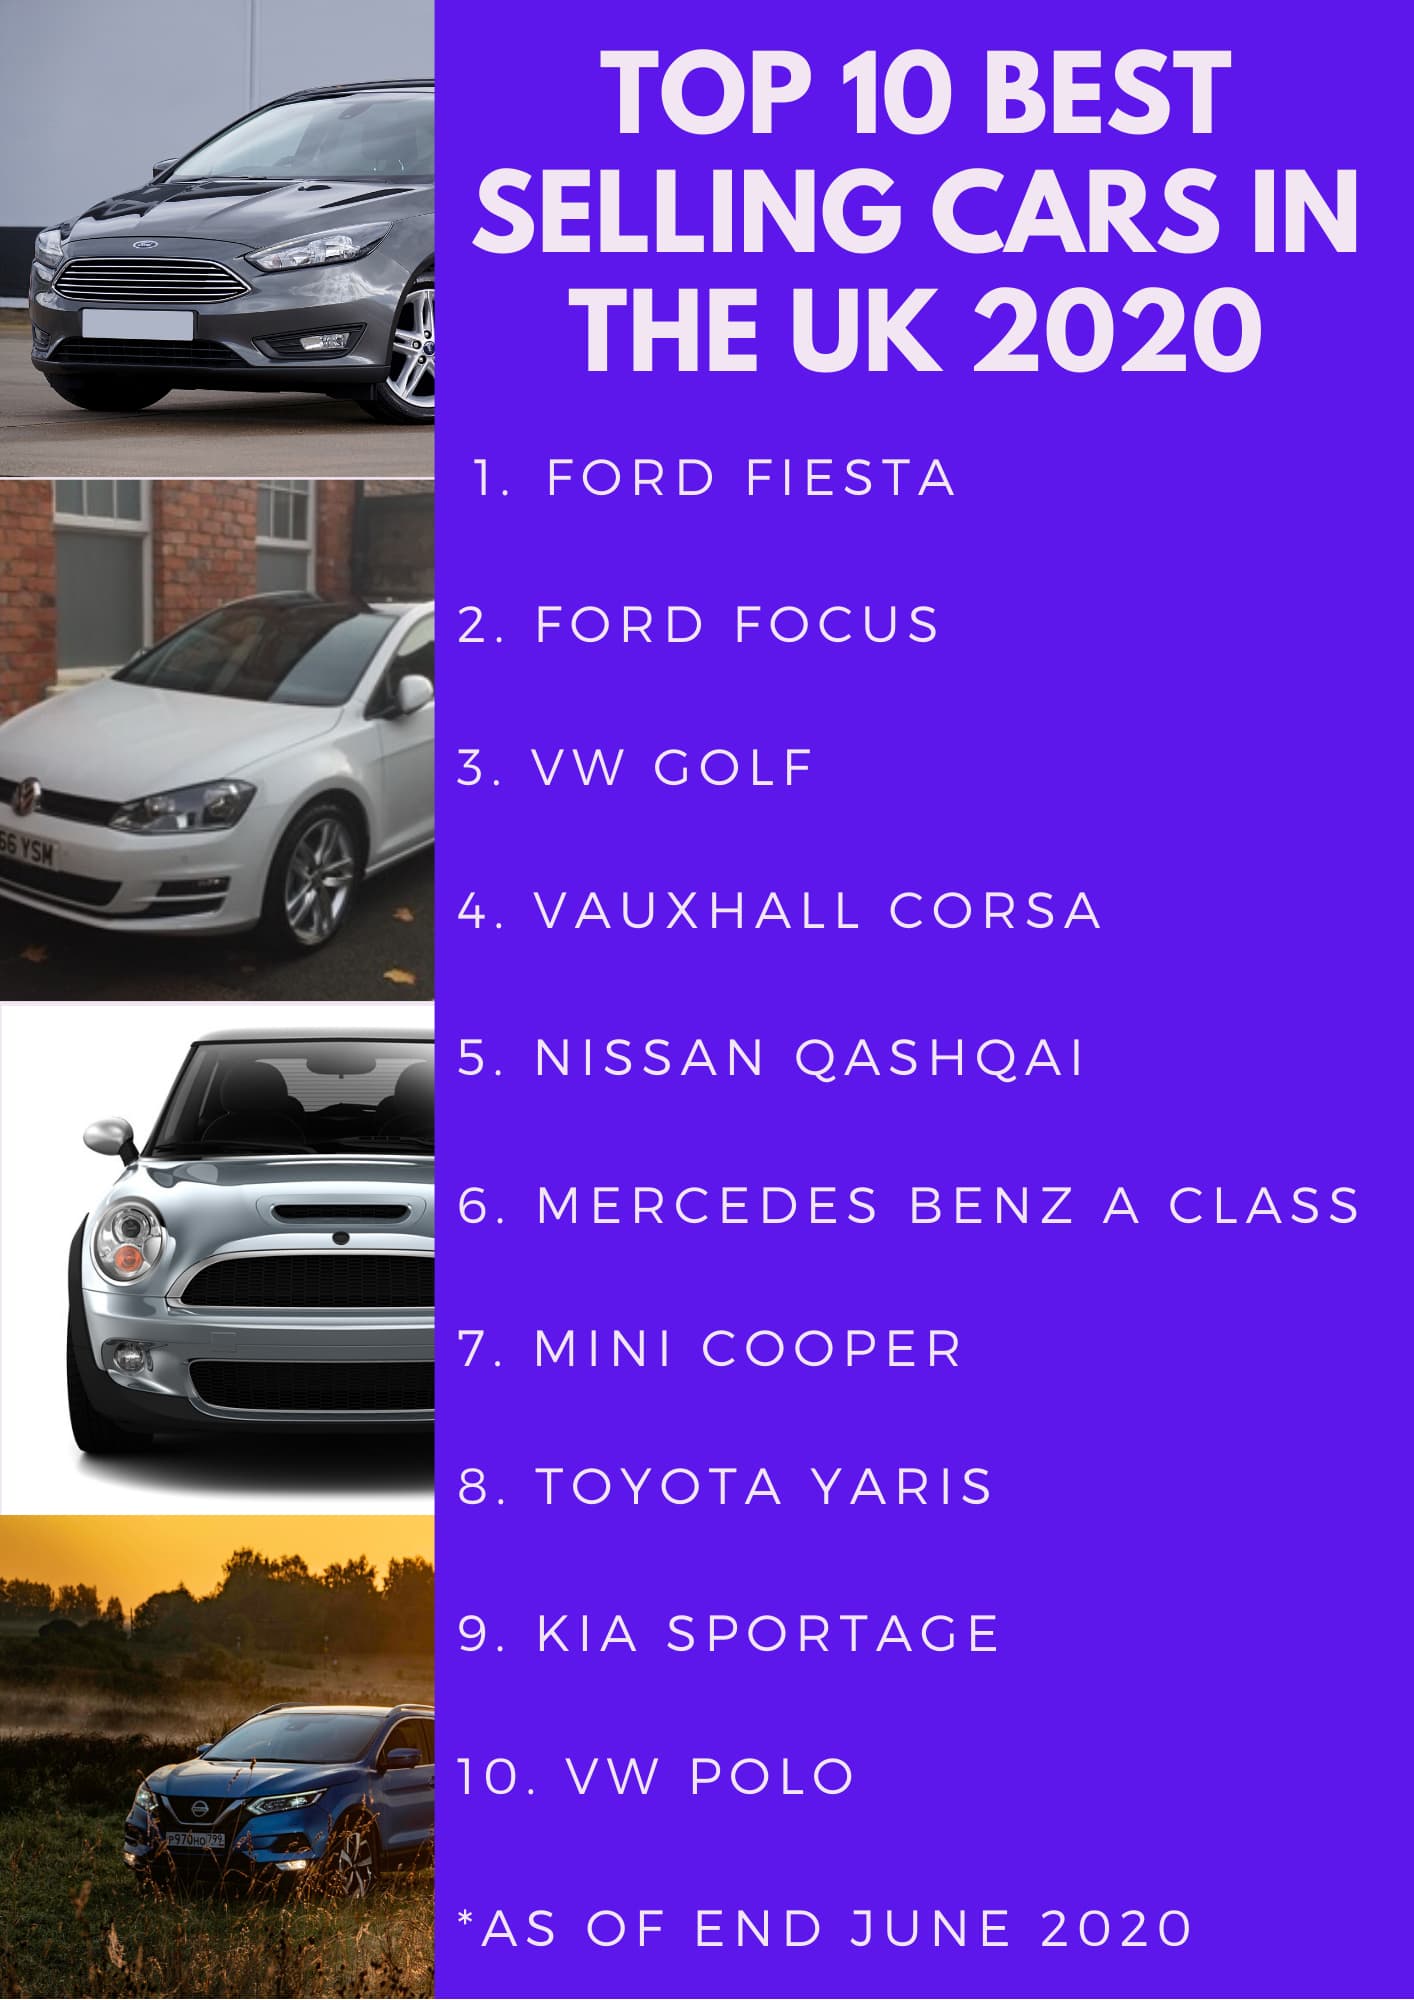 Top 10 best selling cars in the UK 2020